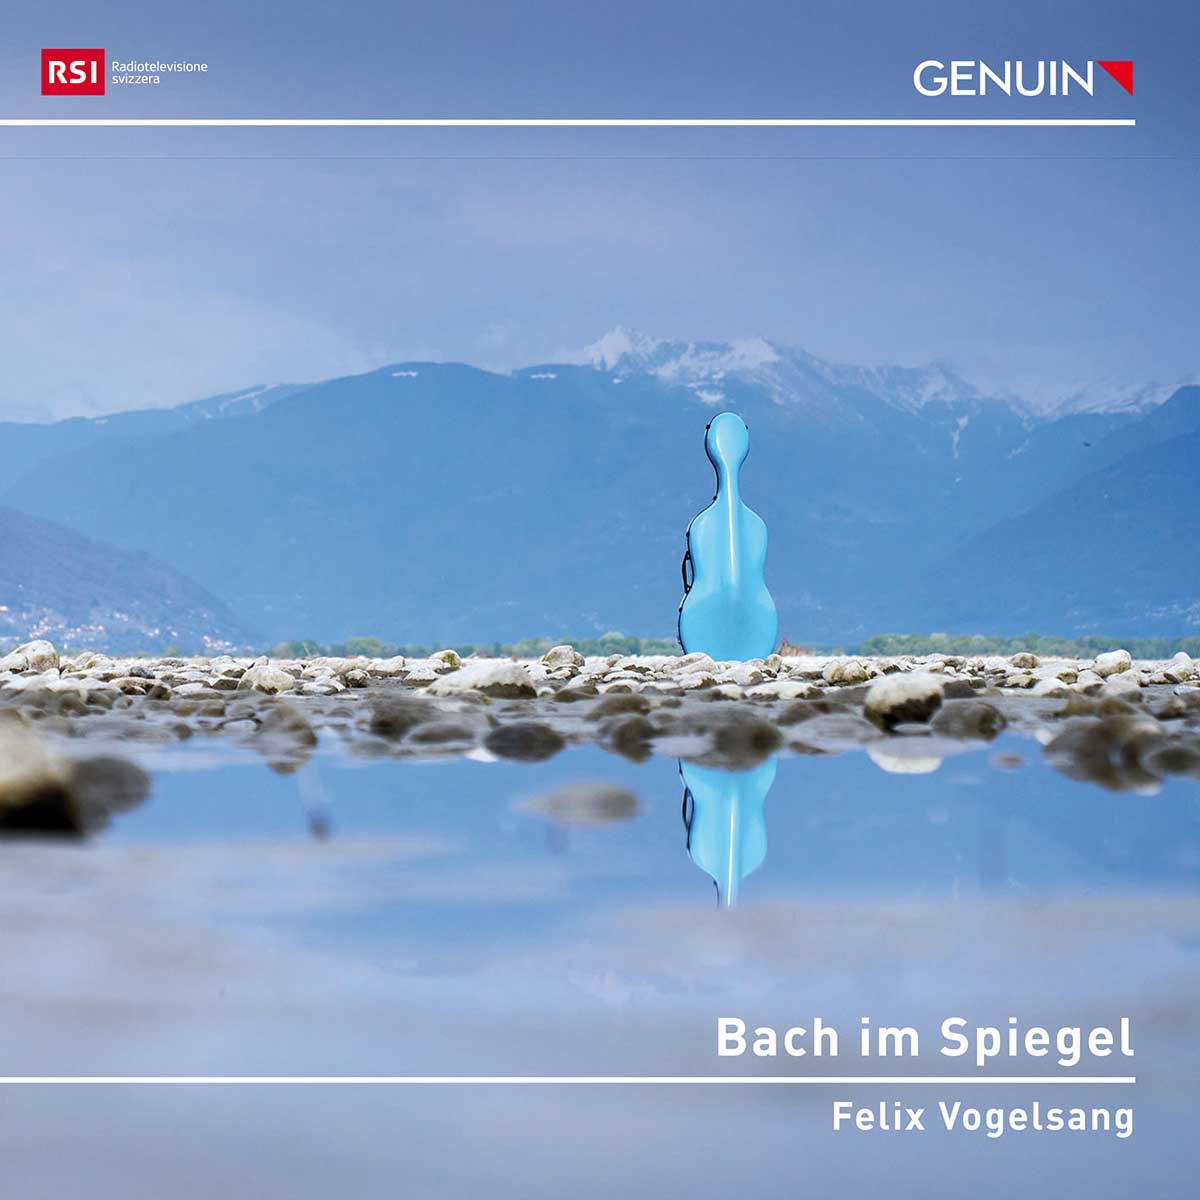 CD album cover 'Bach im Spiegel – Bach in the Mirror' (GEN 23821) with Felix Vogelsang